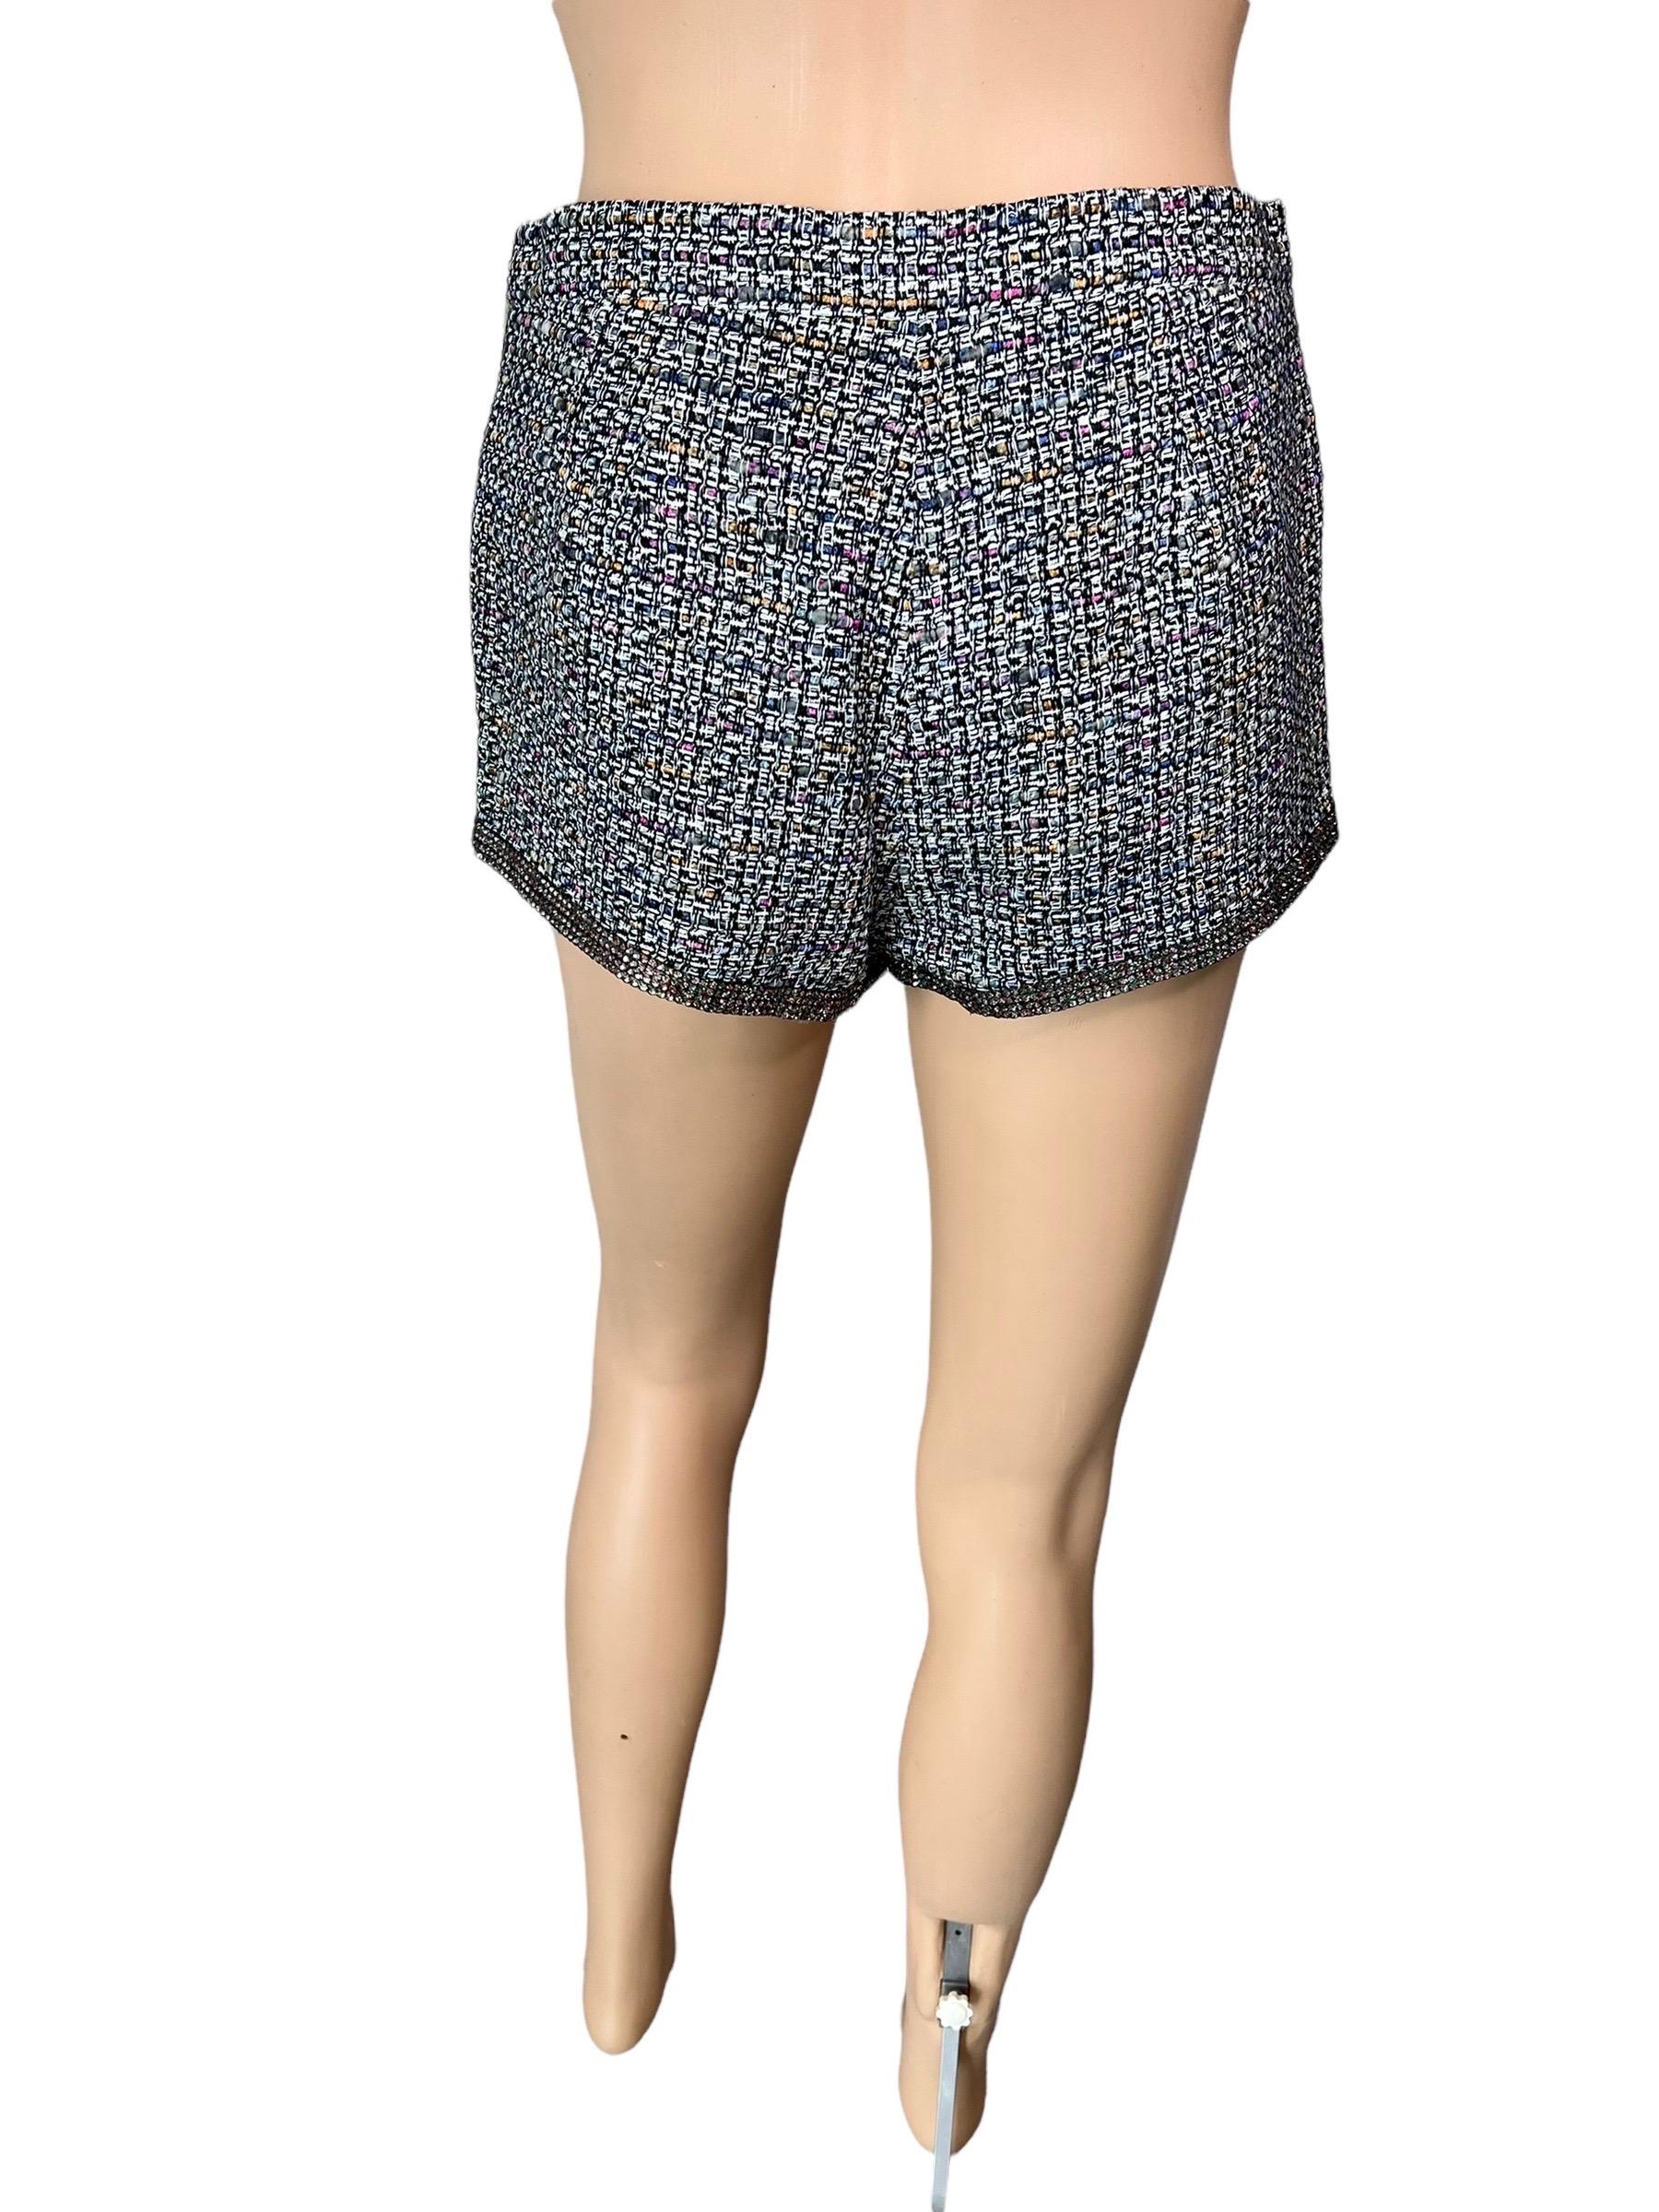 Chanel S/S 2011 Runway CC Logo Crystal Embellished Mini Shorts  In Excellent Condition For Sale In Naples, FL